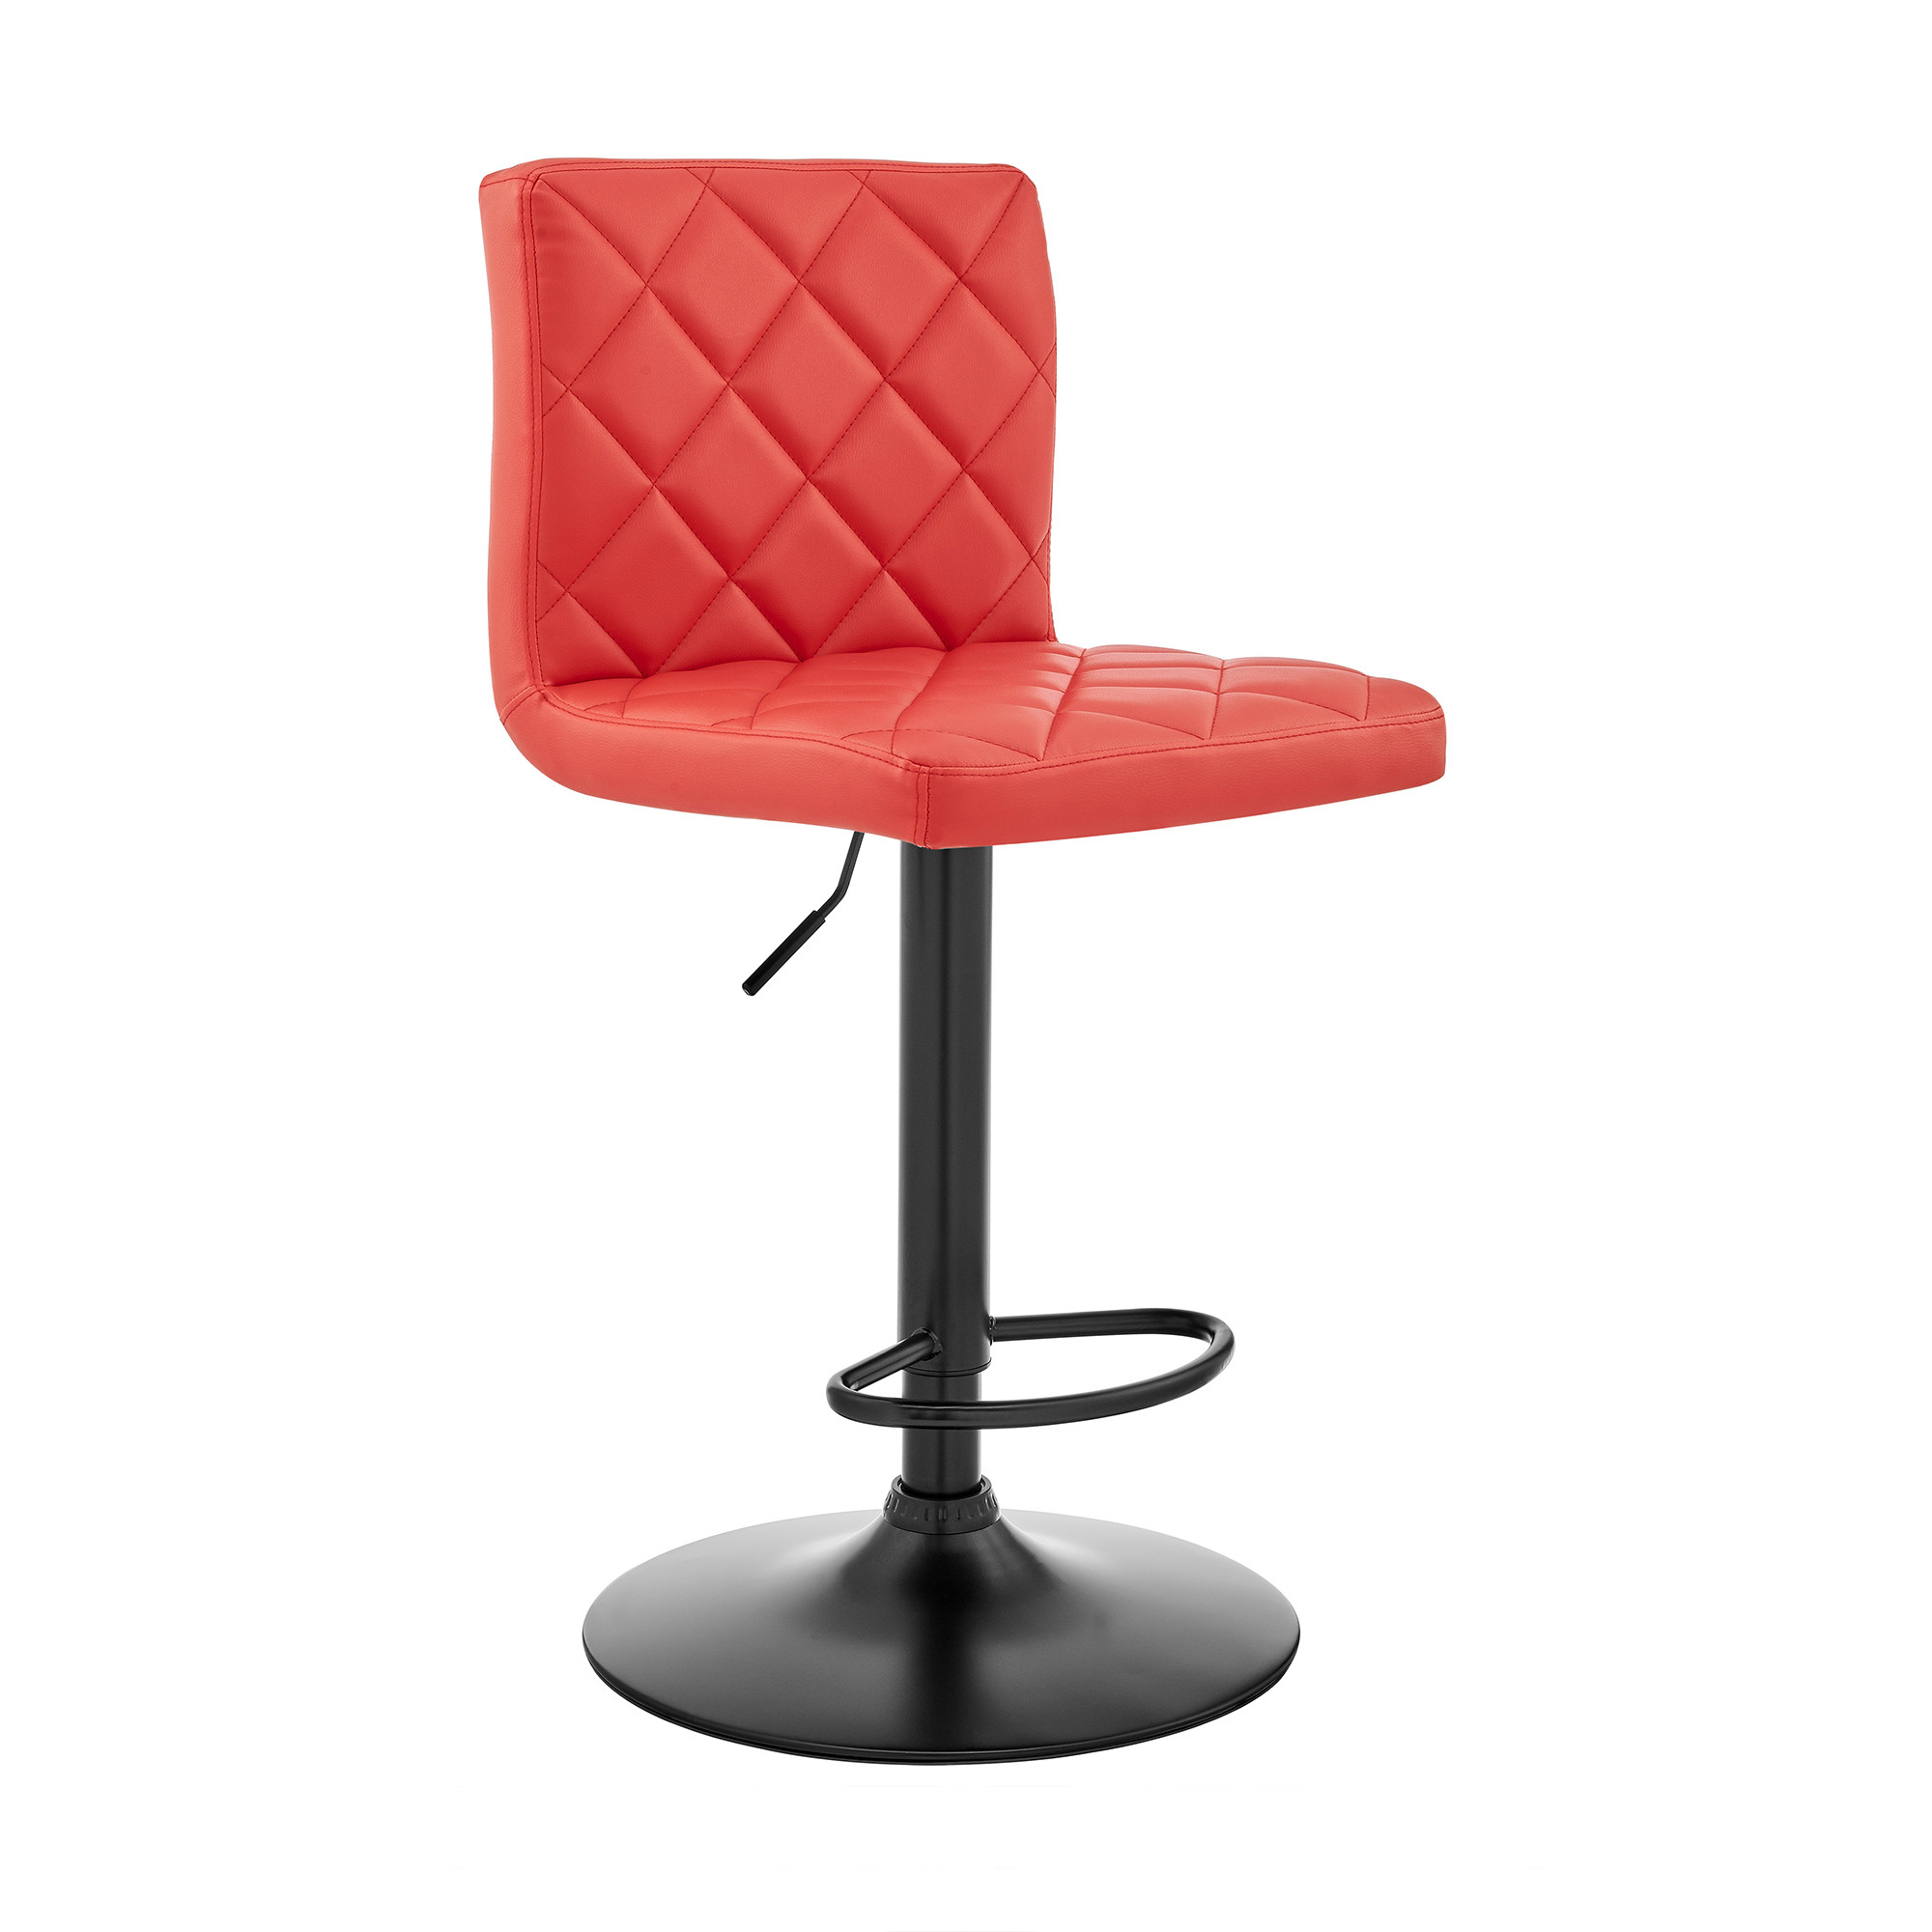 Red Faux Leather Swivel Adjustable Bar Stool